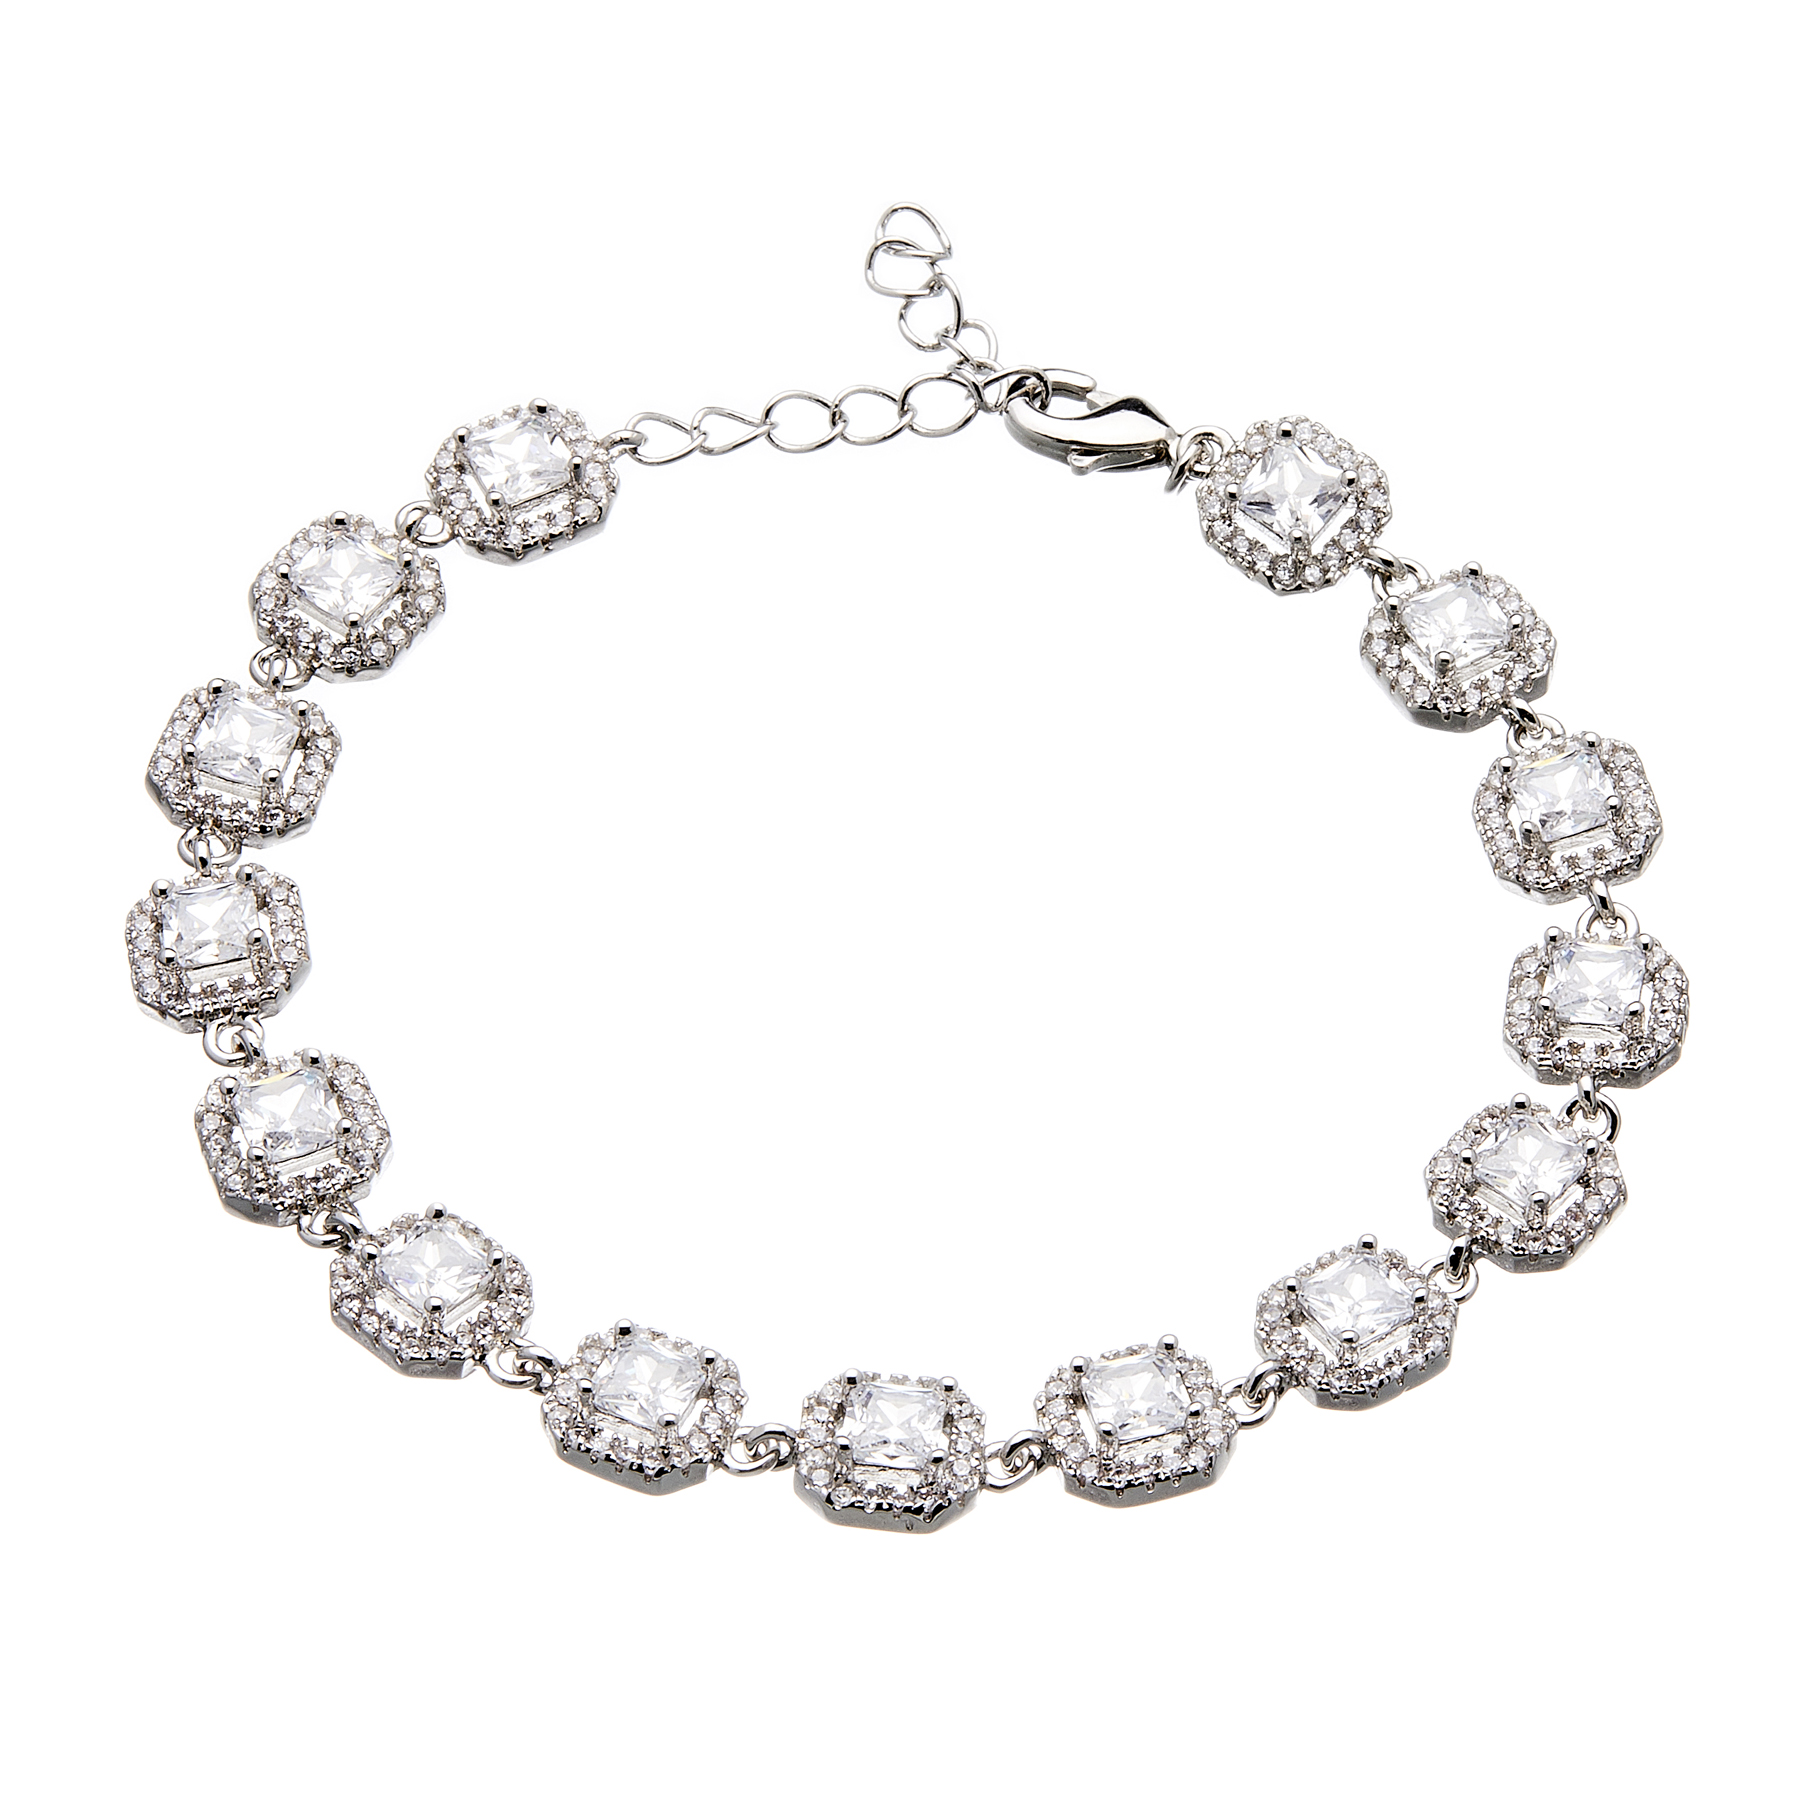 Silver luxury Bracelet - lobster clasp with sparkling Cubic Zirconia Stones and crystals - Nads